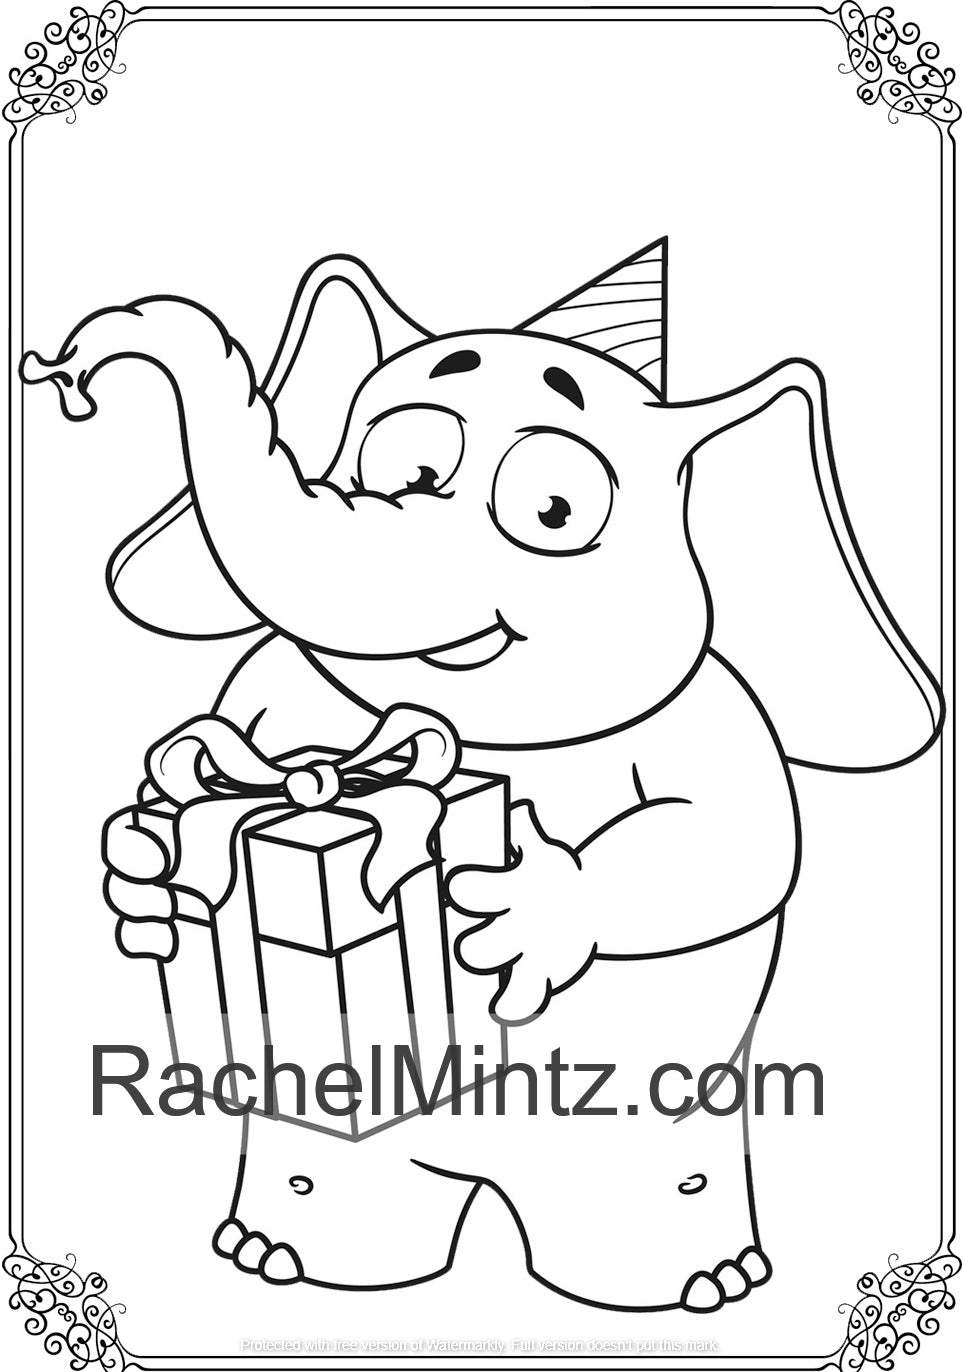 The Cute Elephant - Large Print Coloring Book, Clear Easy Designs, Bold lInes - Printable Format Book